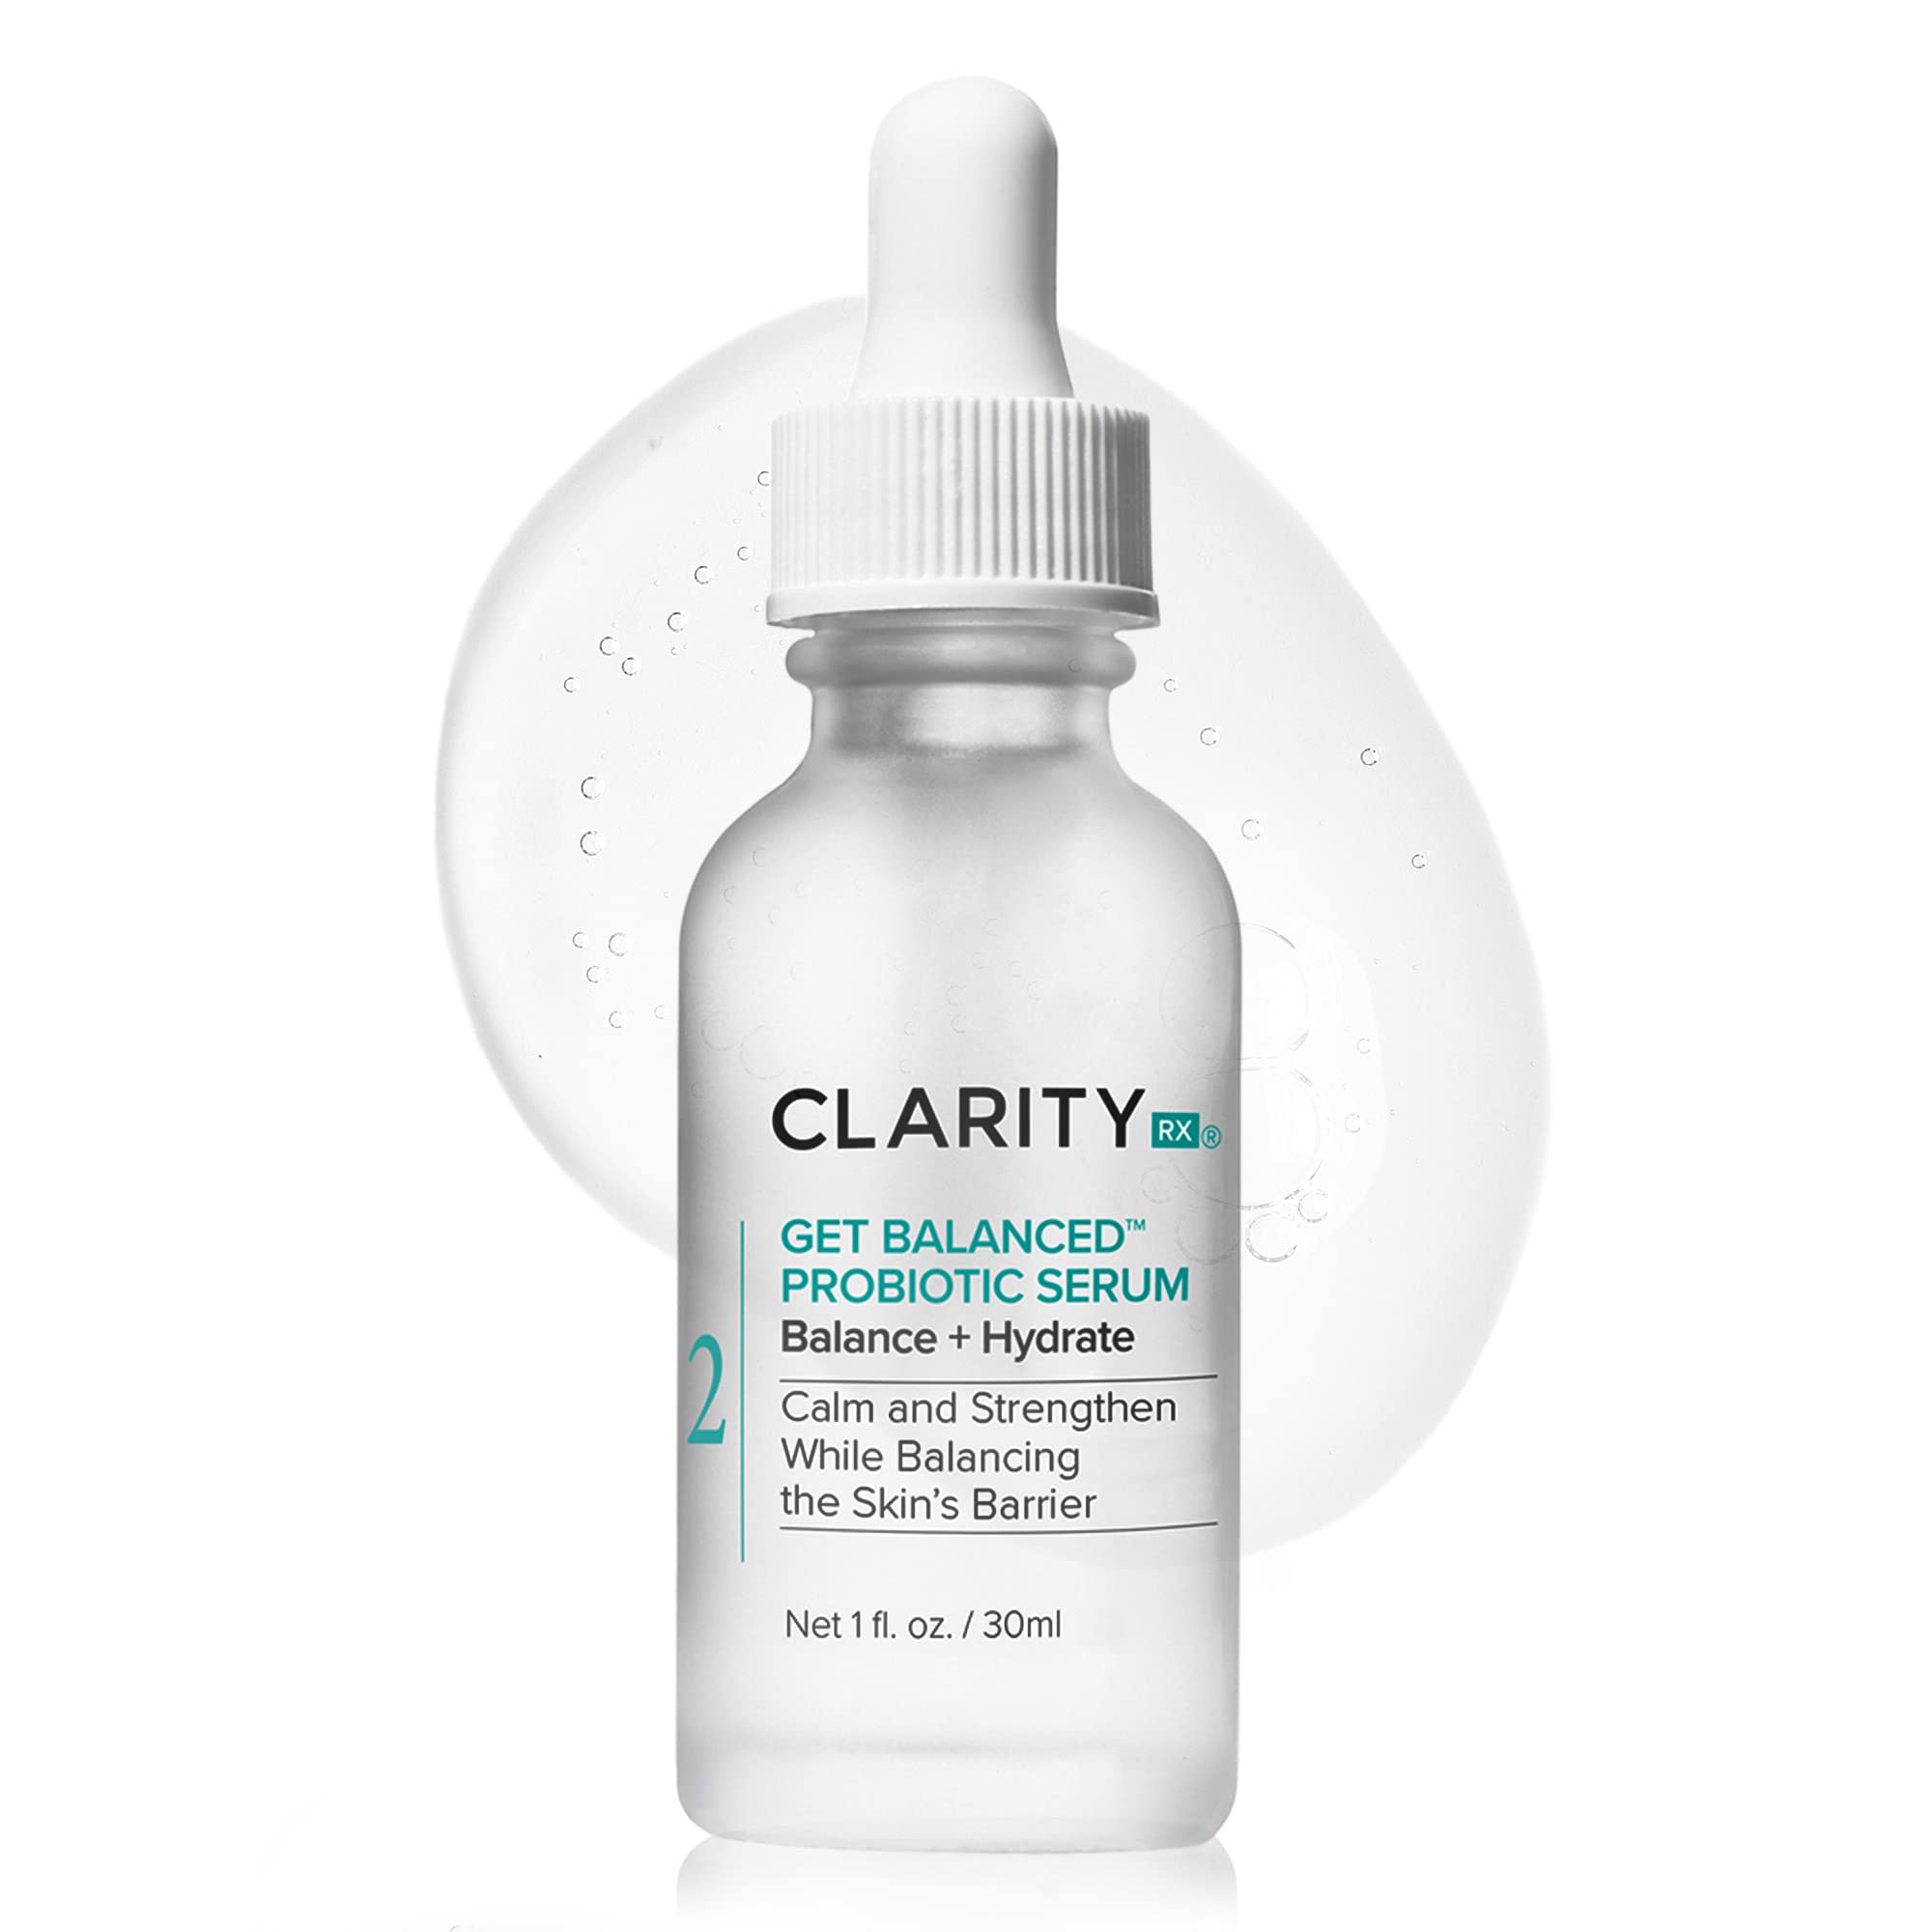 ClarityRx Get Balanced Probiotic Hydrating Face Serum, Natural Plant-Based Skin-Balancing Treatment with Hyaluronic Acid & Antioxidants for Normal & Aging Skin (1 fl oz)